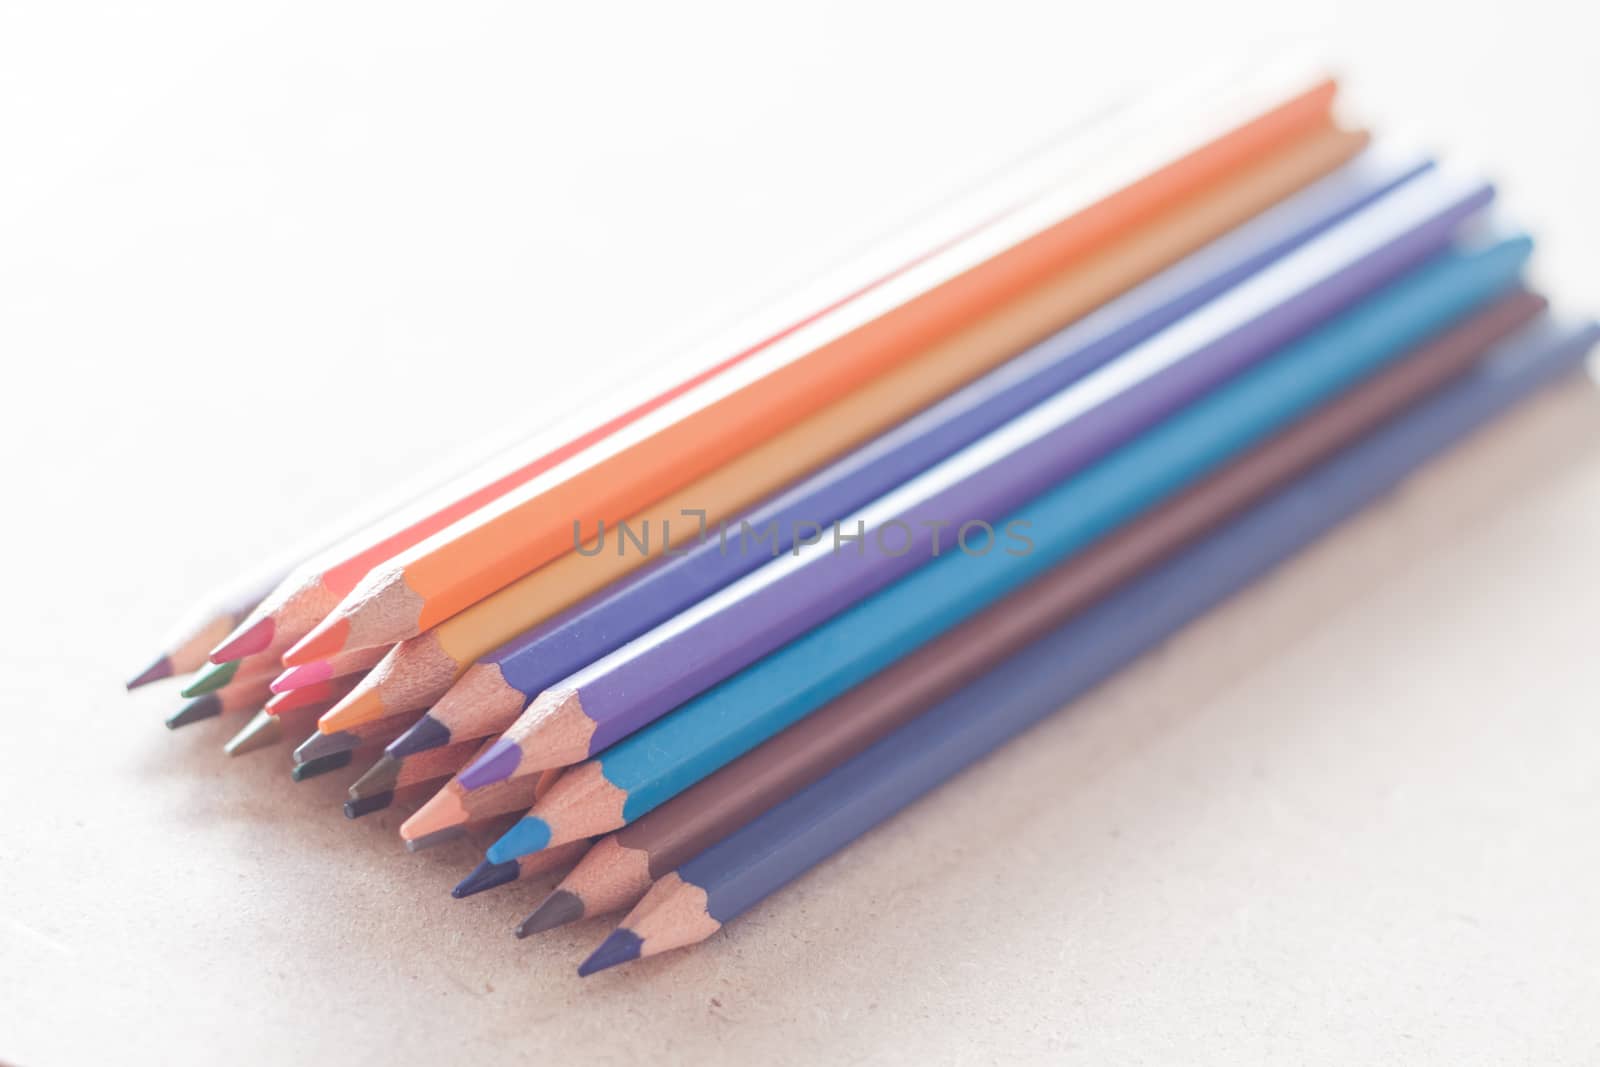 Cluster of colorful pencil crayons, stock photo